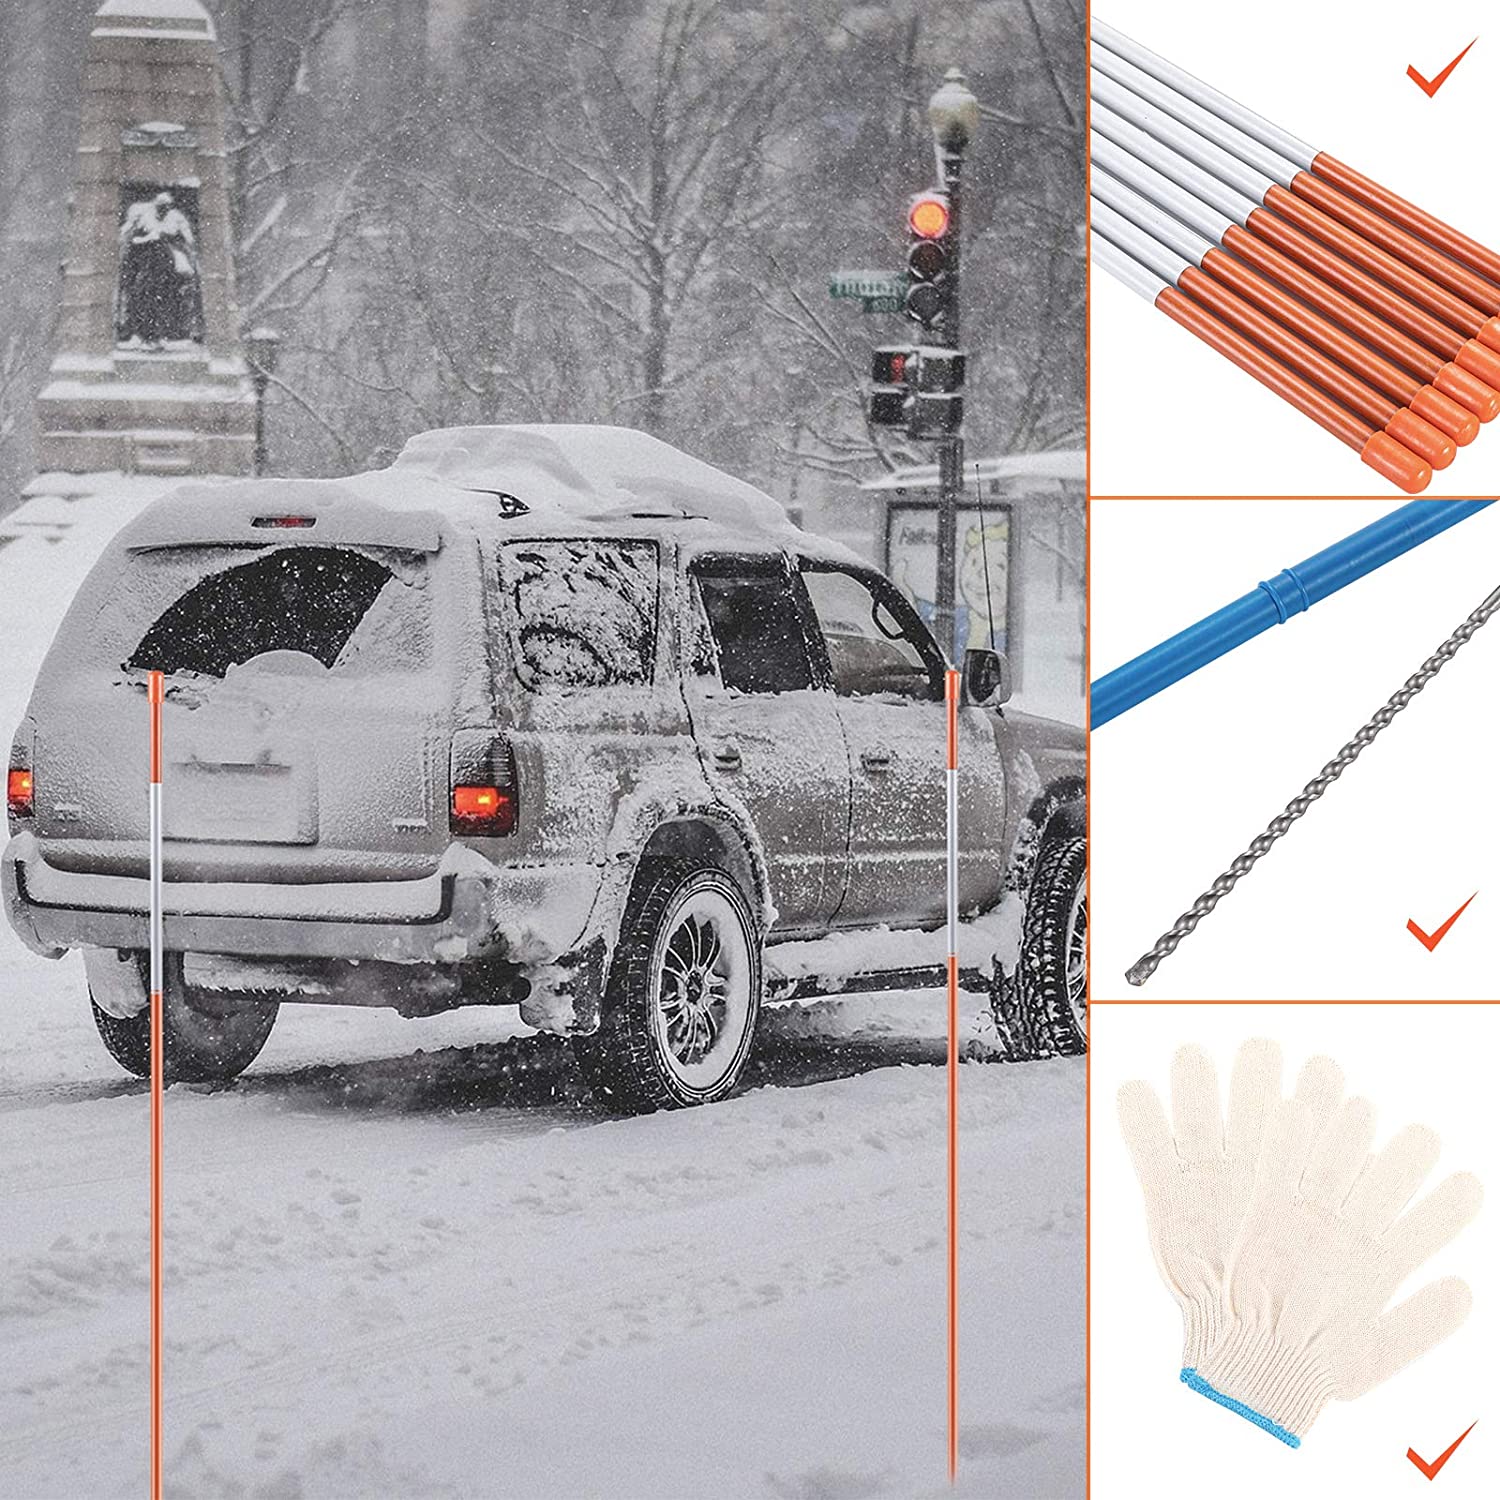 CZC AUTO 50PCS 72 Inch Driveway Marker Reflectors 5/16 Inch Dia Orange Fiberglass Snow Stakes with Reflective Tape for Easy Visibility Reflective Driveway Poles for Snow Plowing with Gloves&Drill Bit 